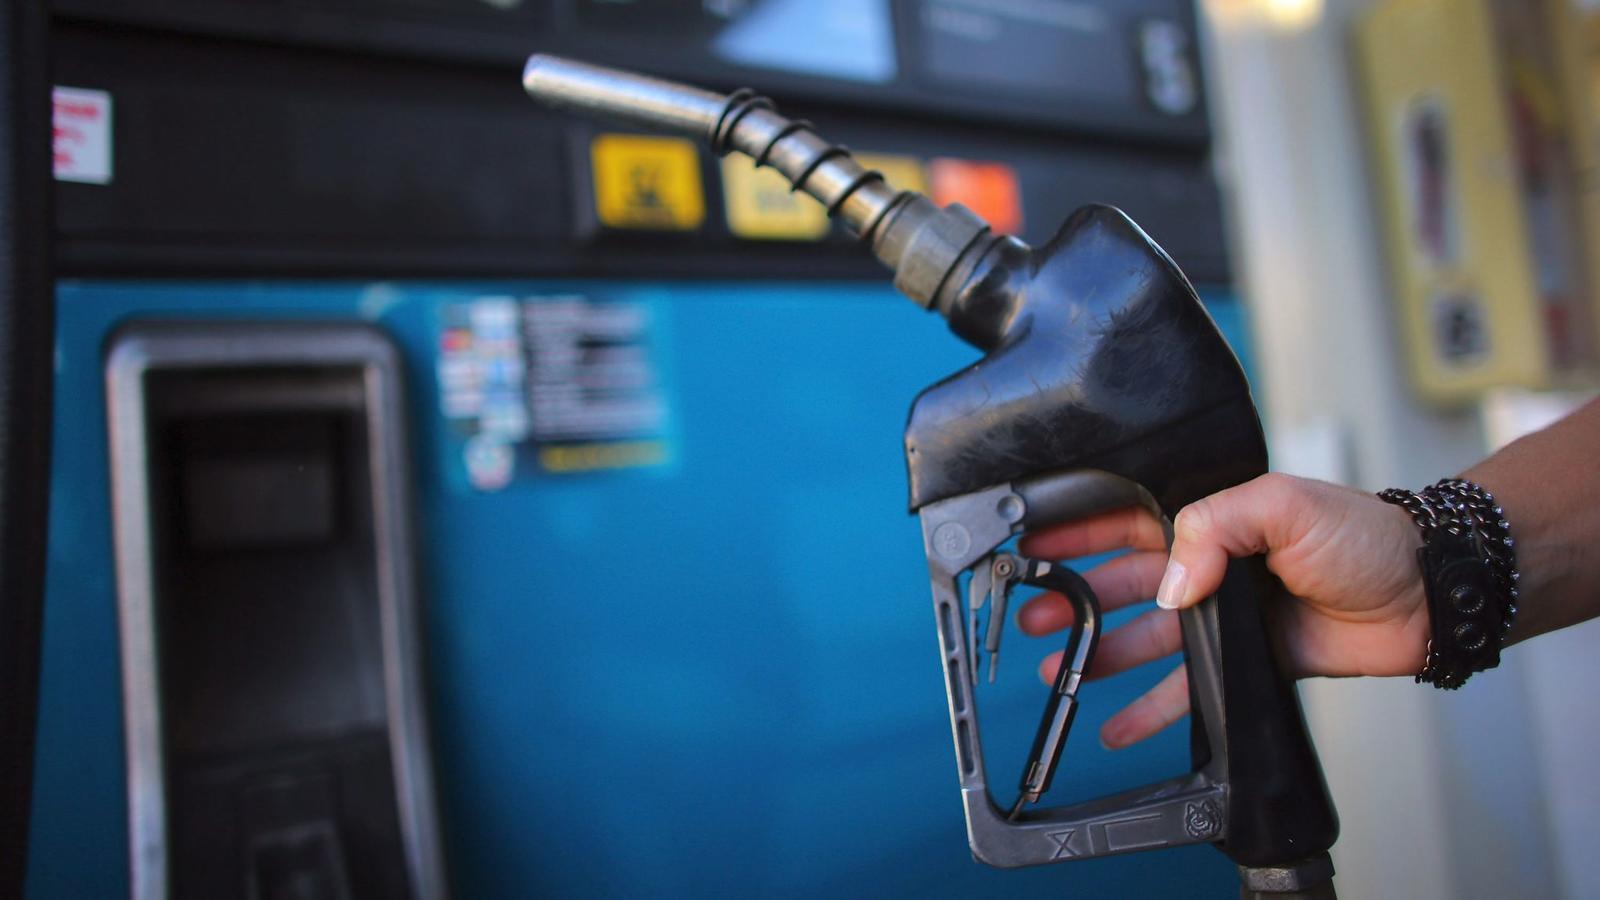 california-s-gas-tax-increase-goes-into-effect-today-here-s-what-you